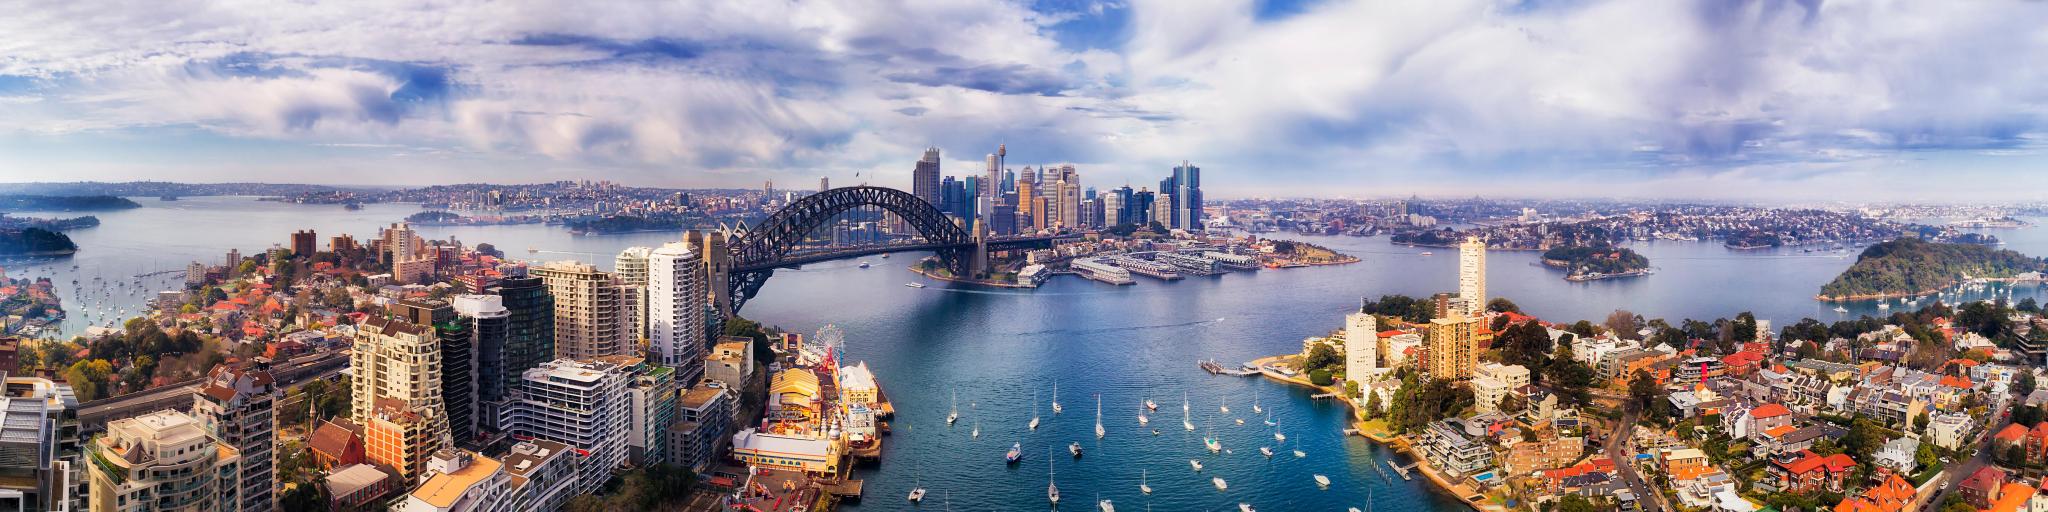 Aerial view of Sydney with Harbour Bridge, Opera House and CBD